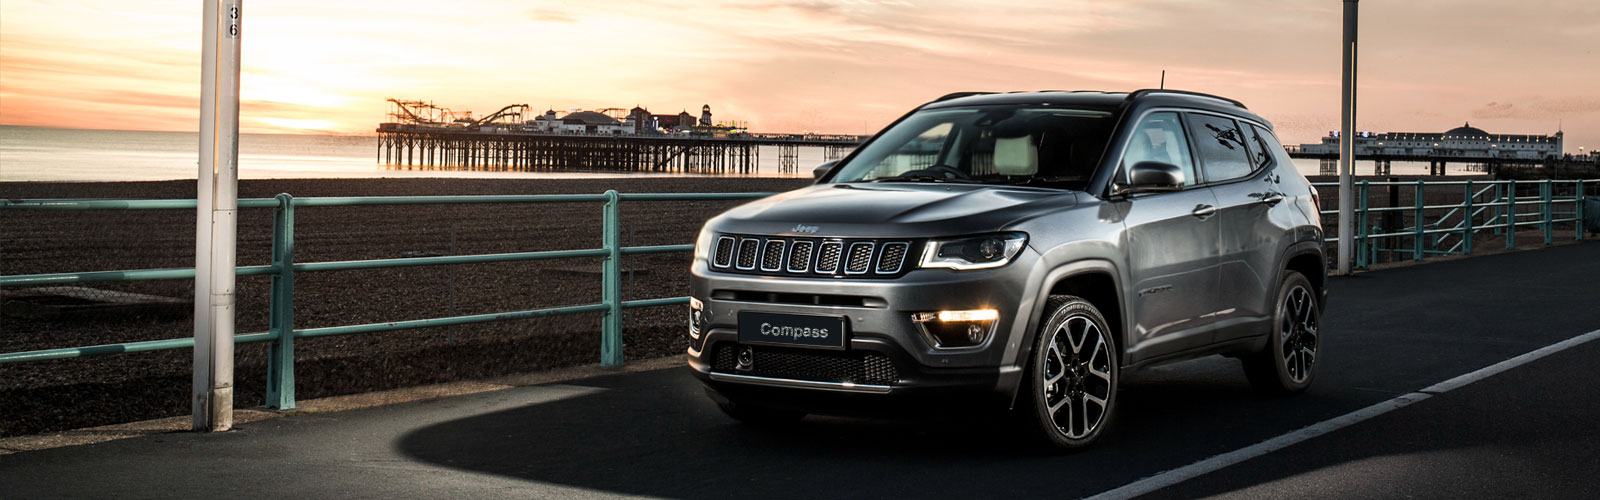 Jeep Compass On Road View